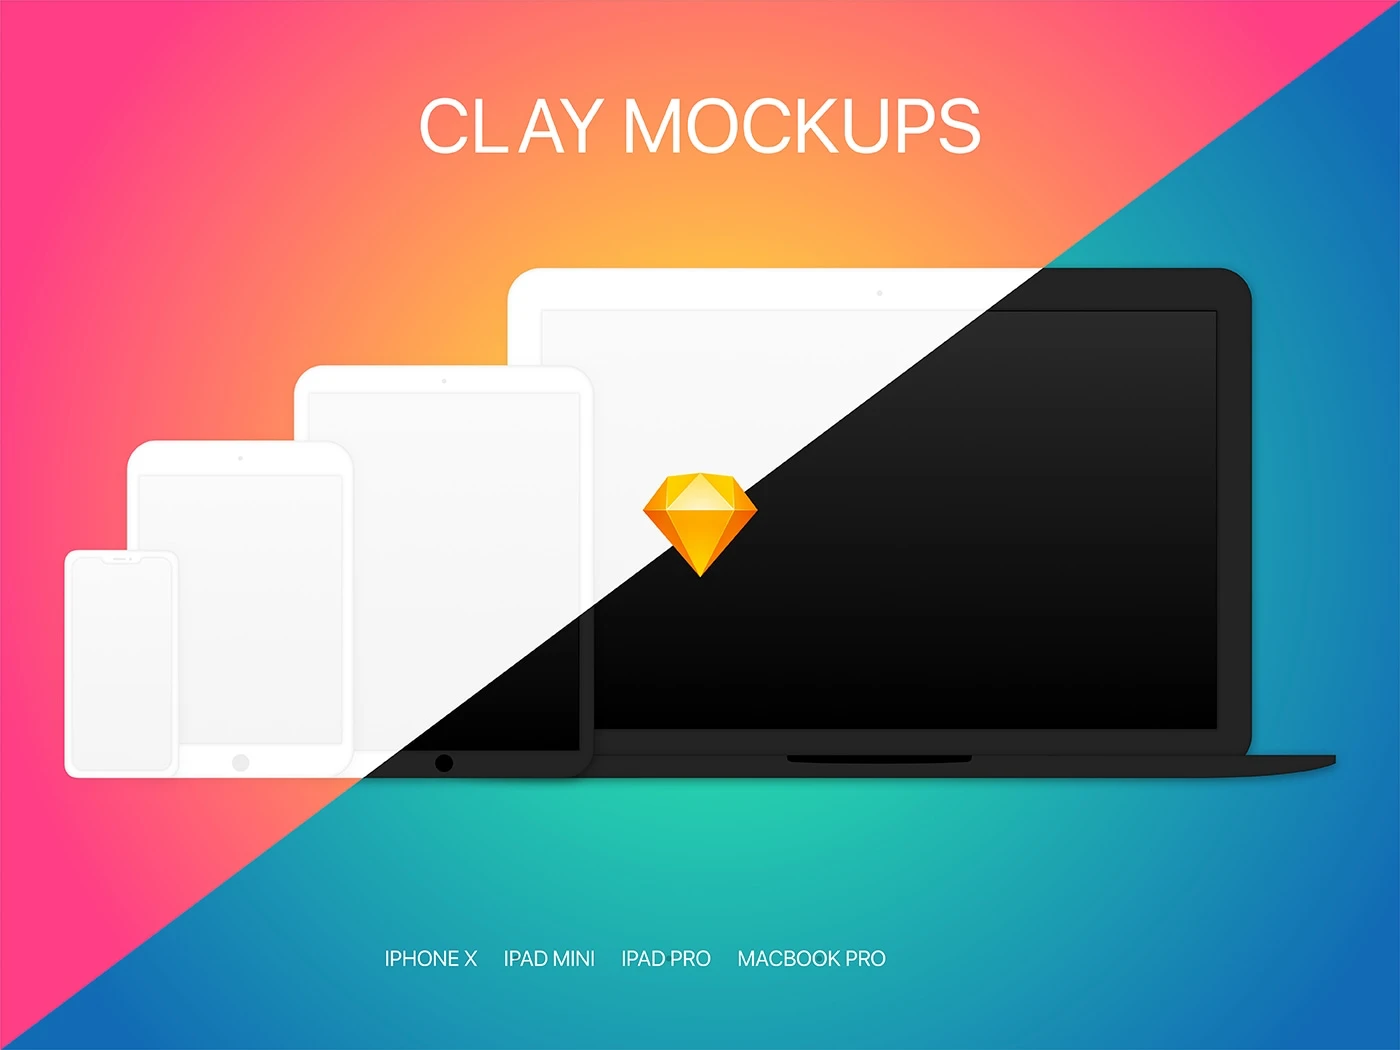 Clay Device Mockups - Includes iPhone X, iPad Mini, iPad Pro, and Macbook Pro devices in light and dark